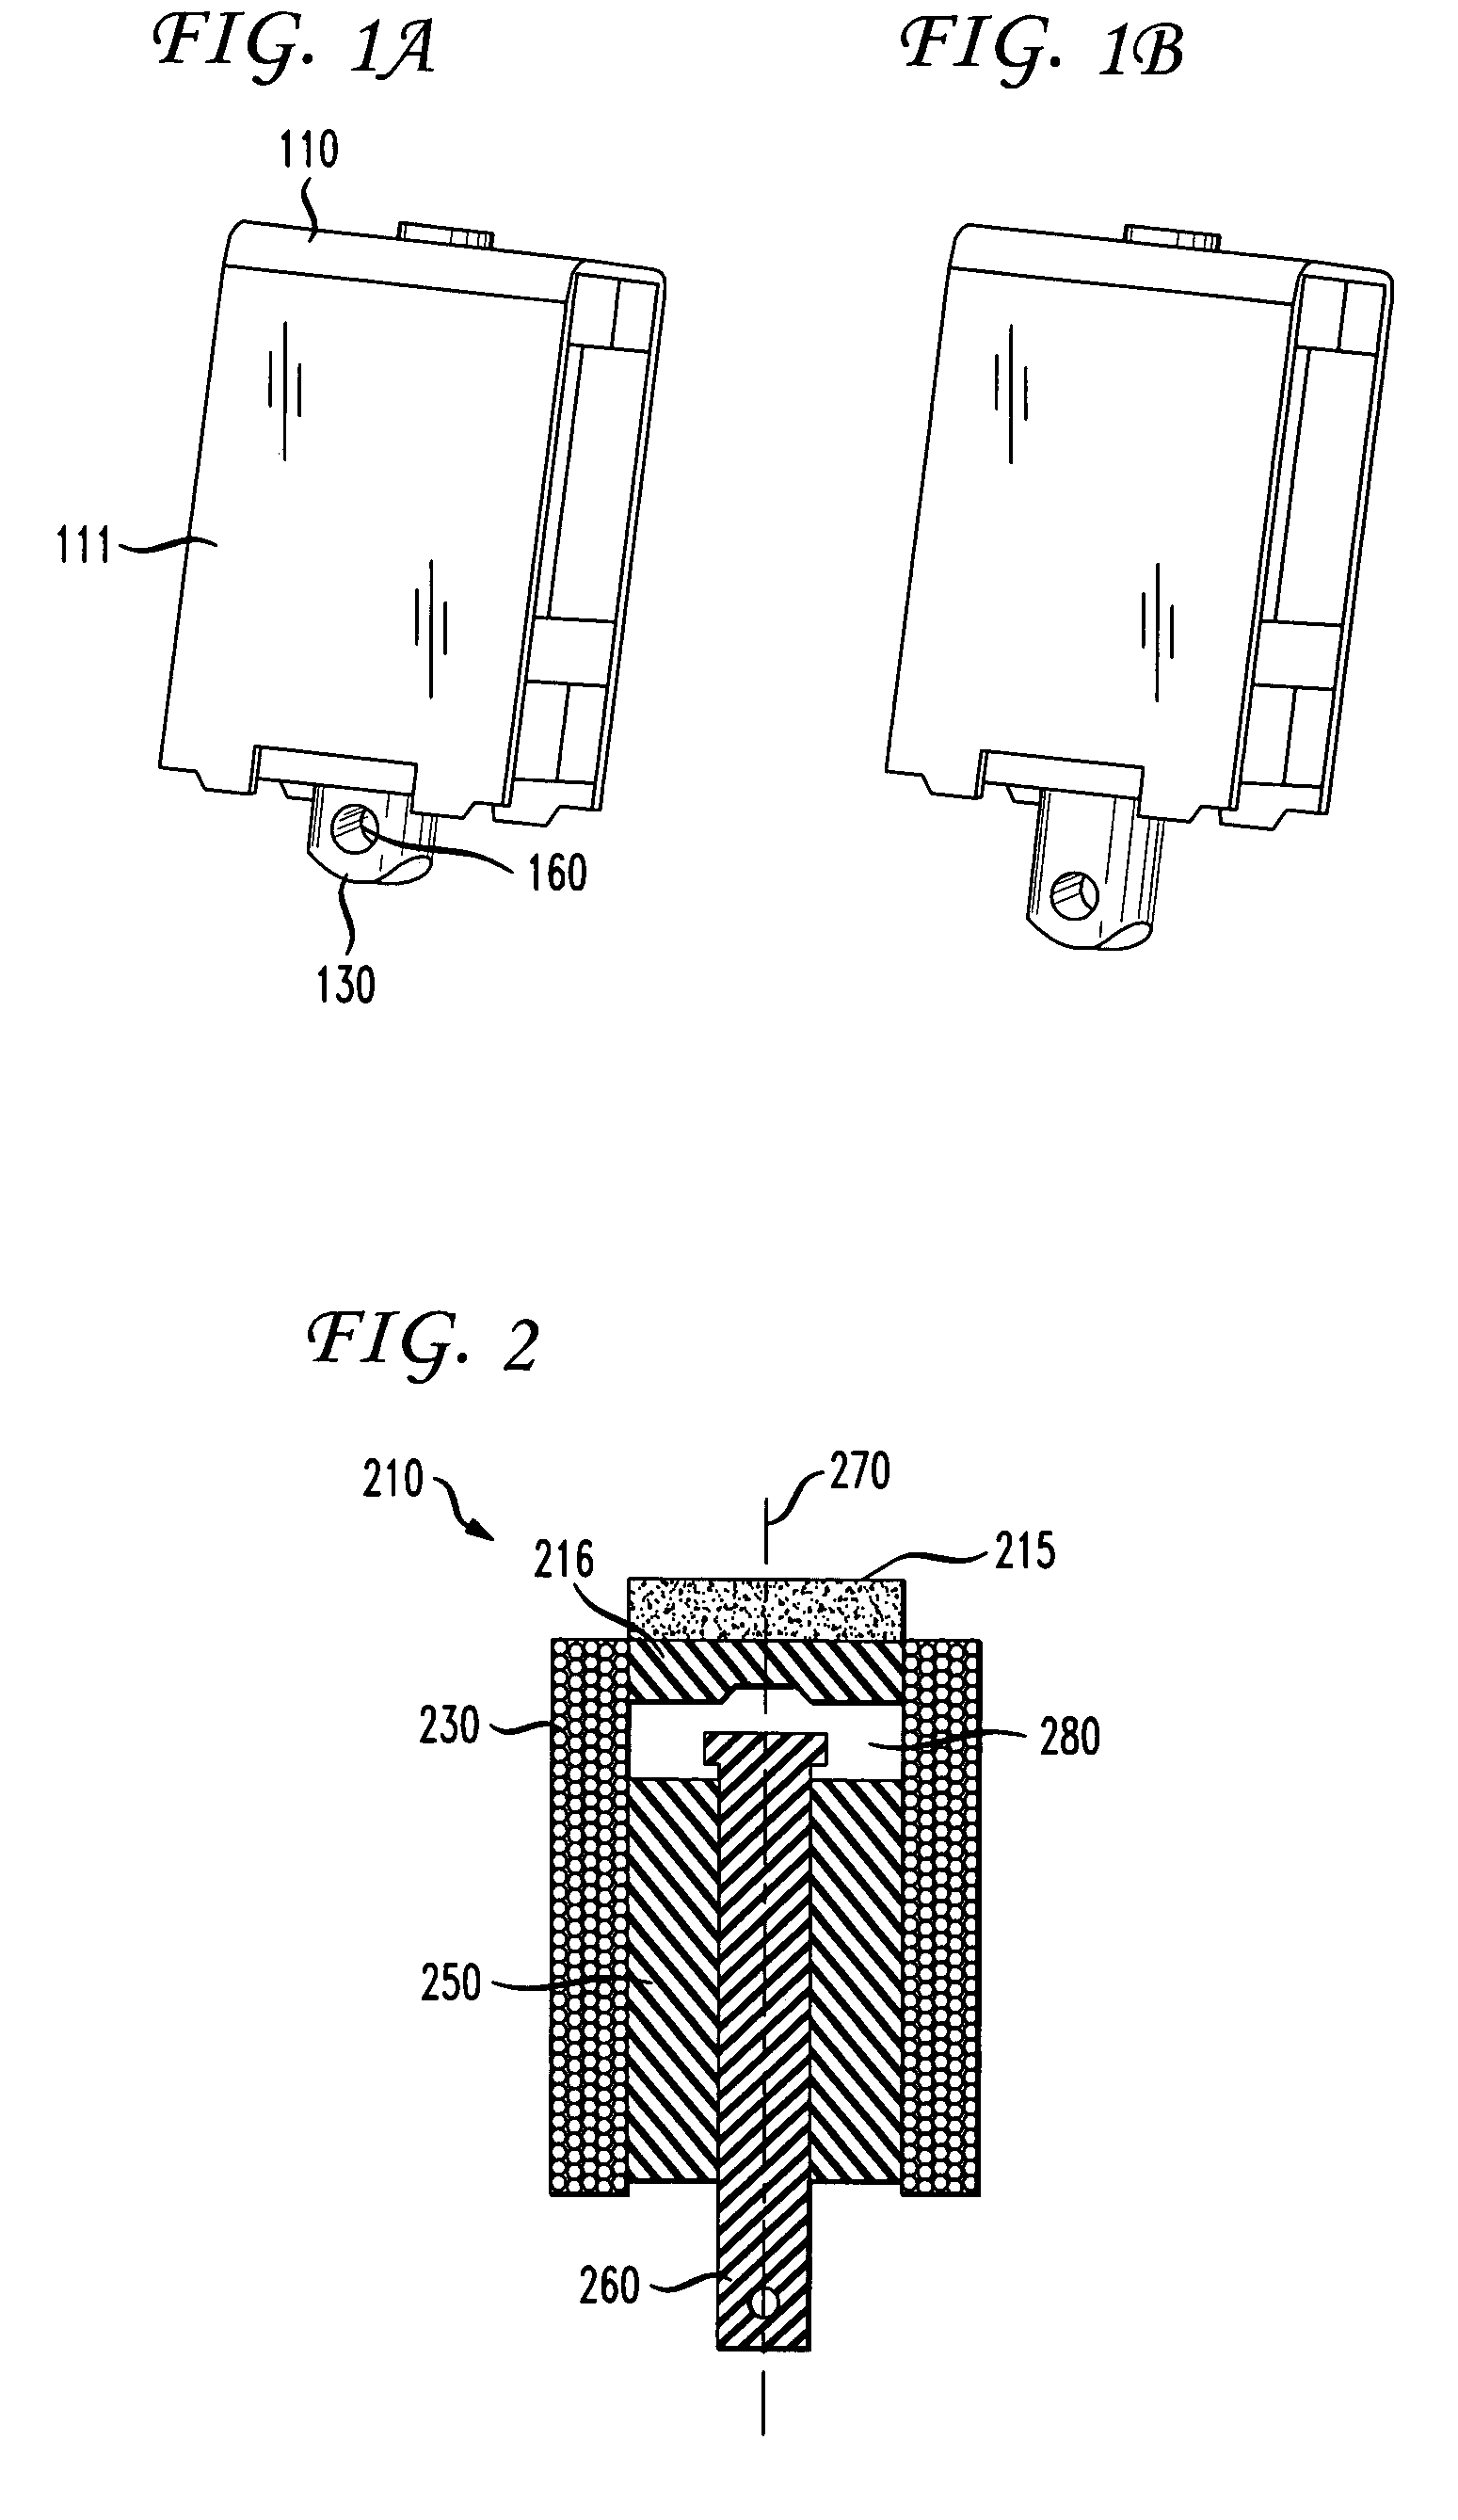 Maglatch mechanism for use in lighting control pod